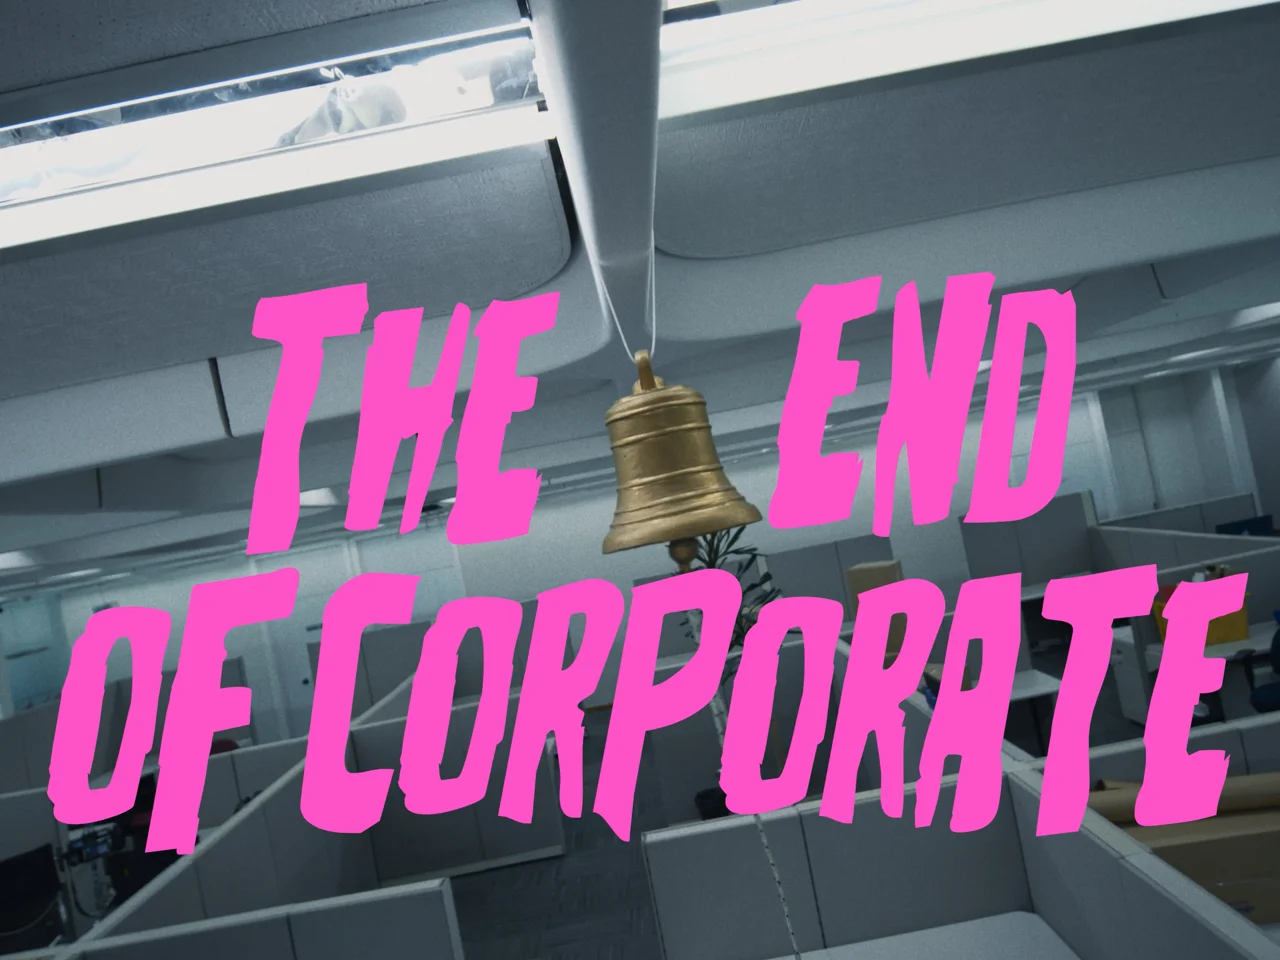 WT + Messs - The End Of Corporate